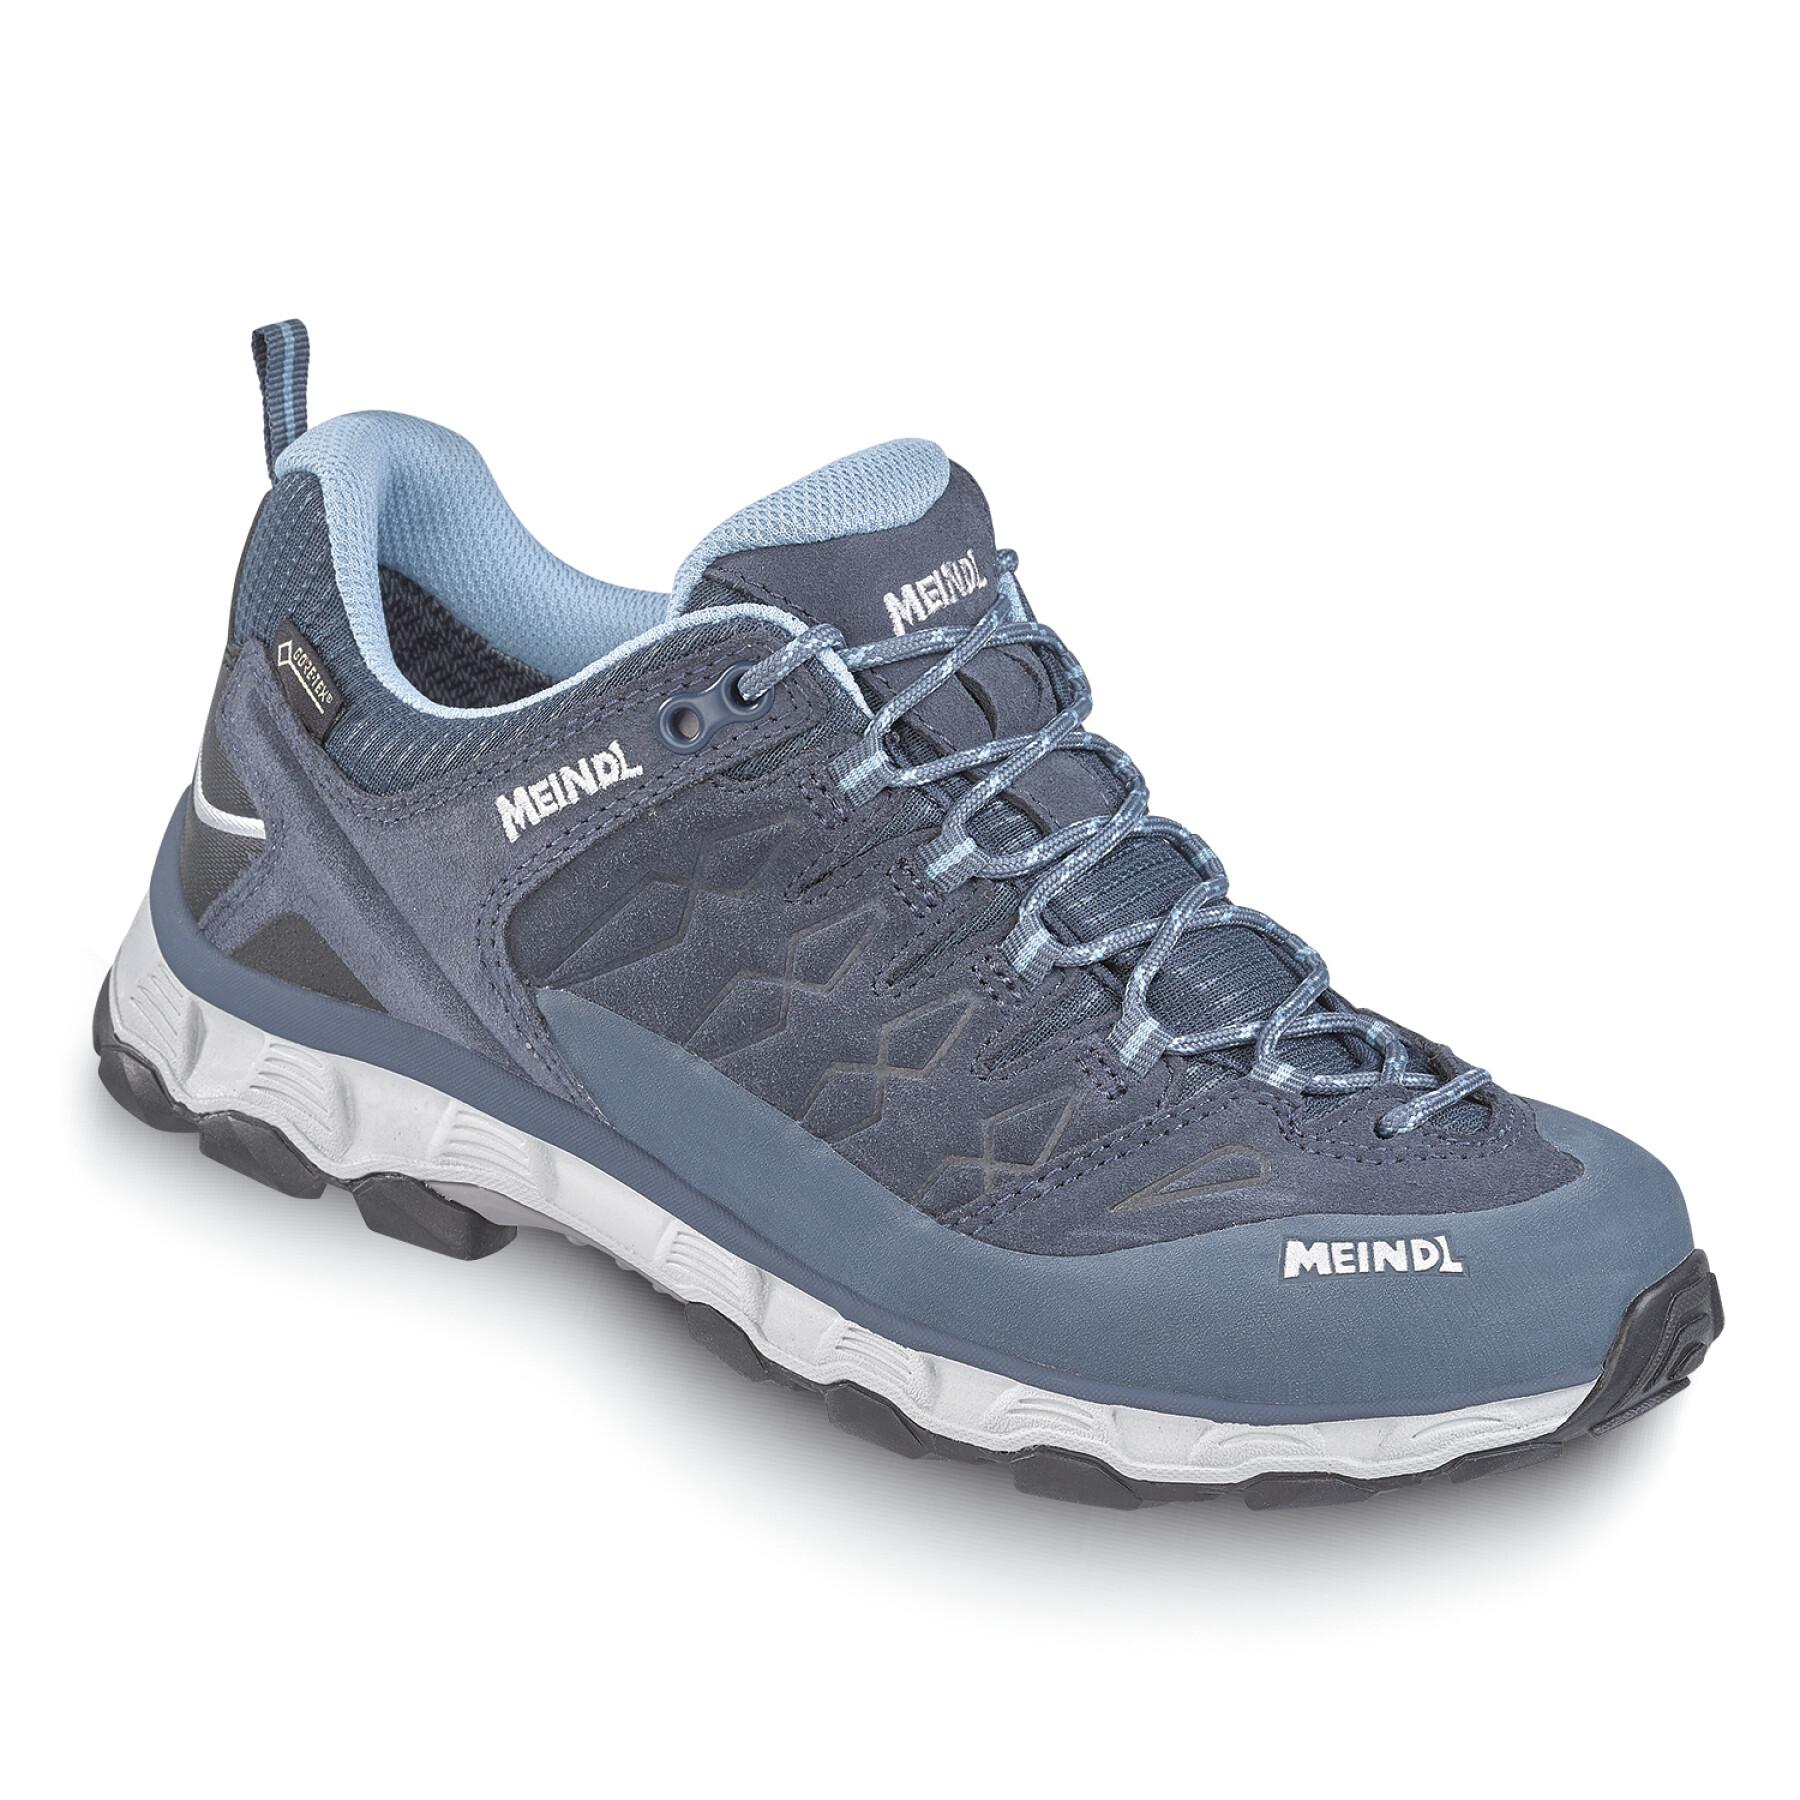 pauze Verknald kloon Shoes from trail femme Meindl Lite GTX - Hiking Shoes - Hiking